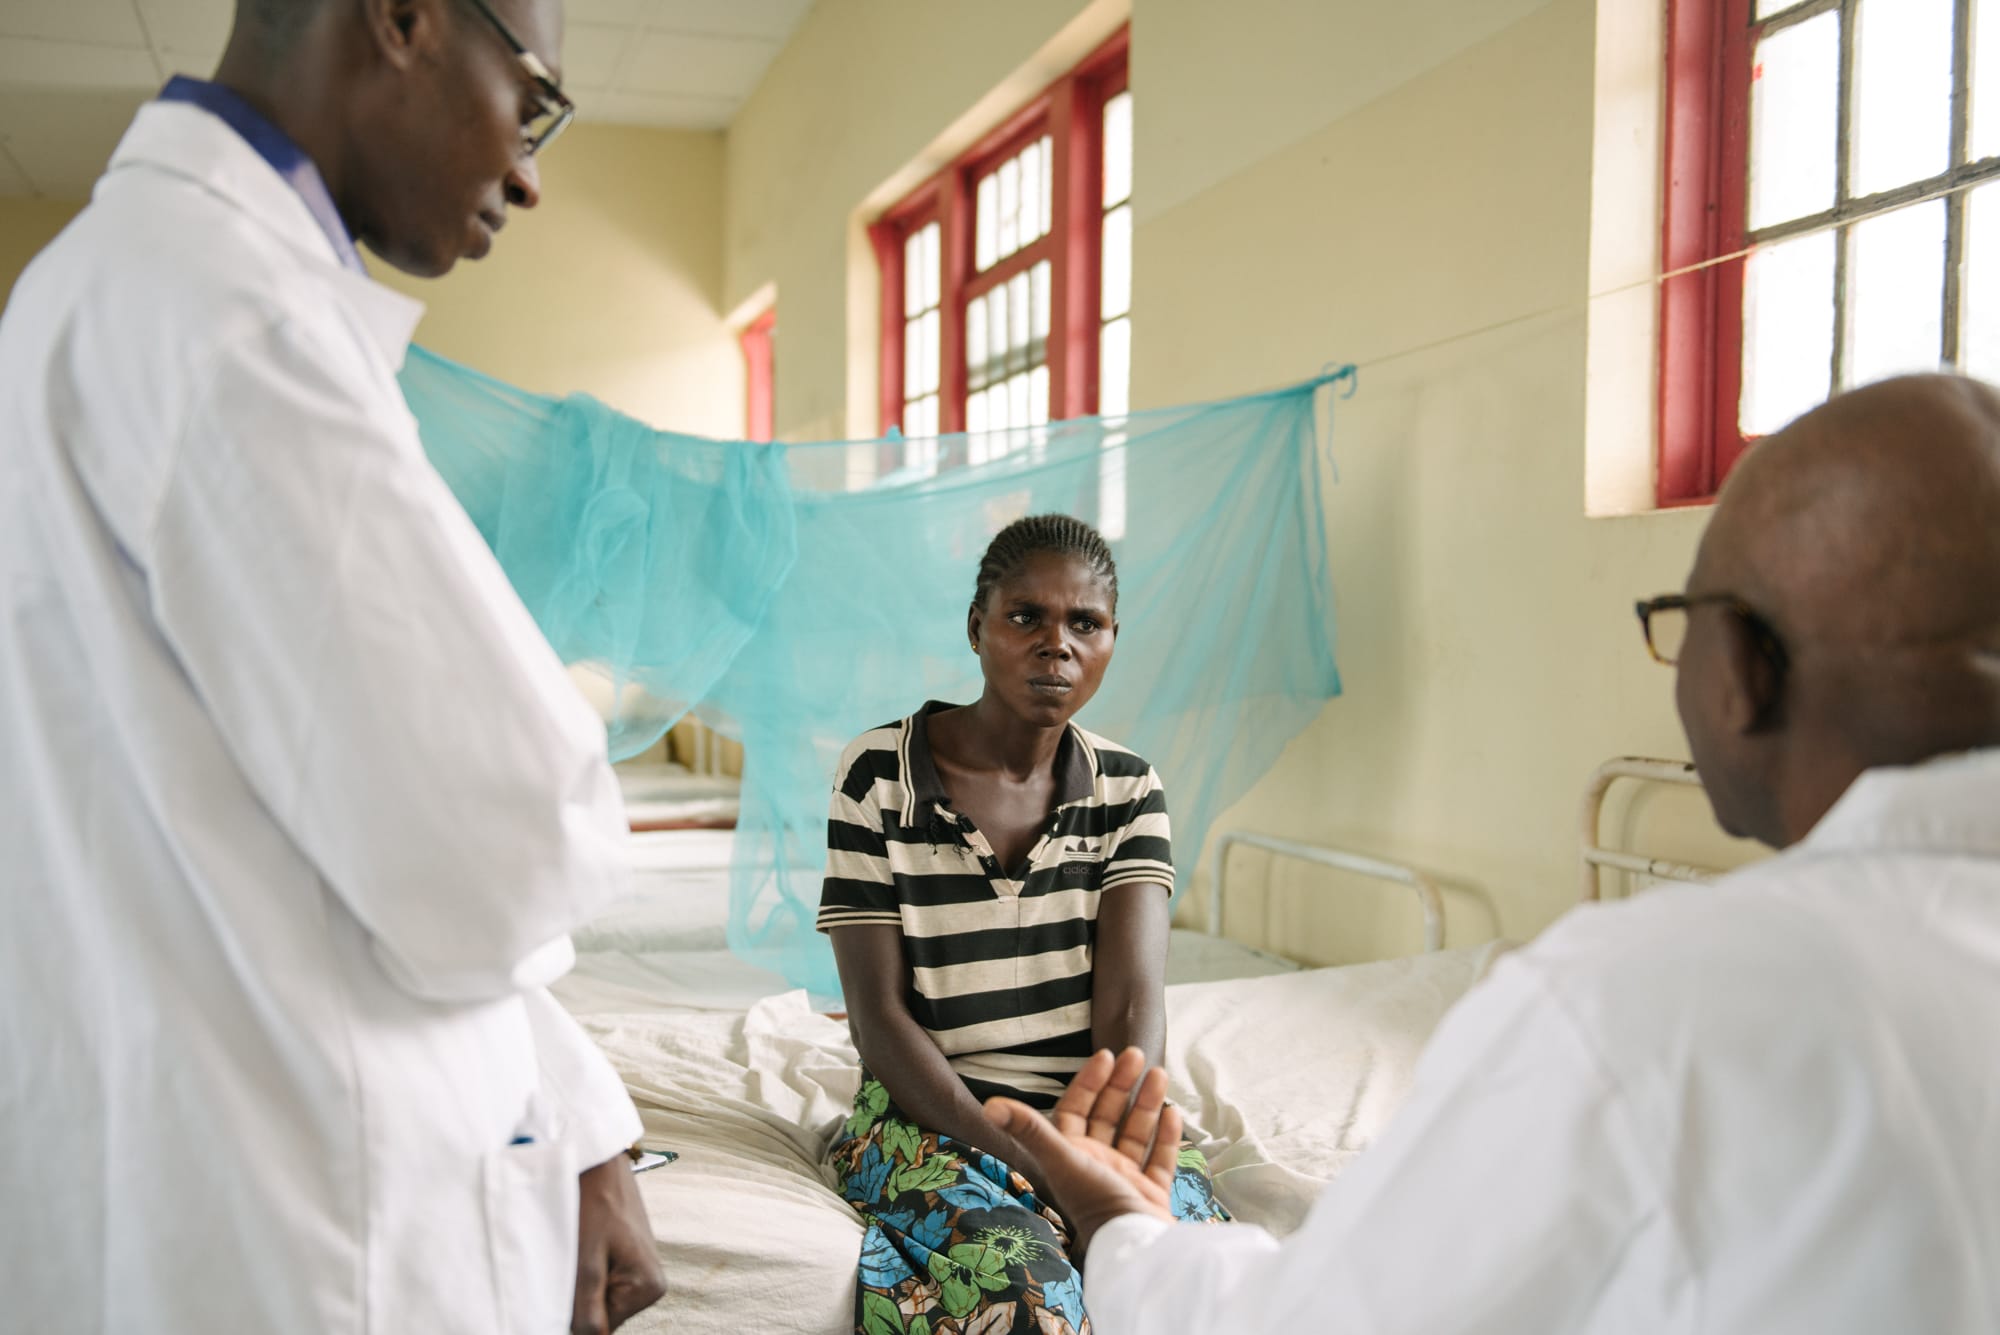 Doctors talking with patient in hospital